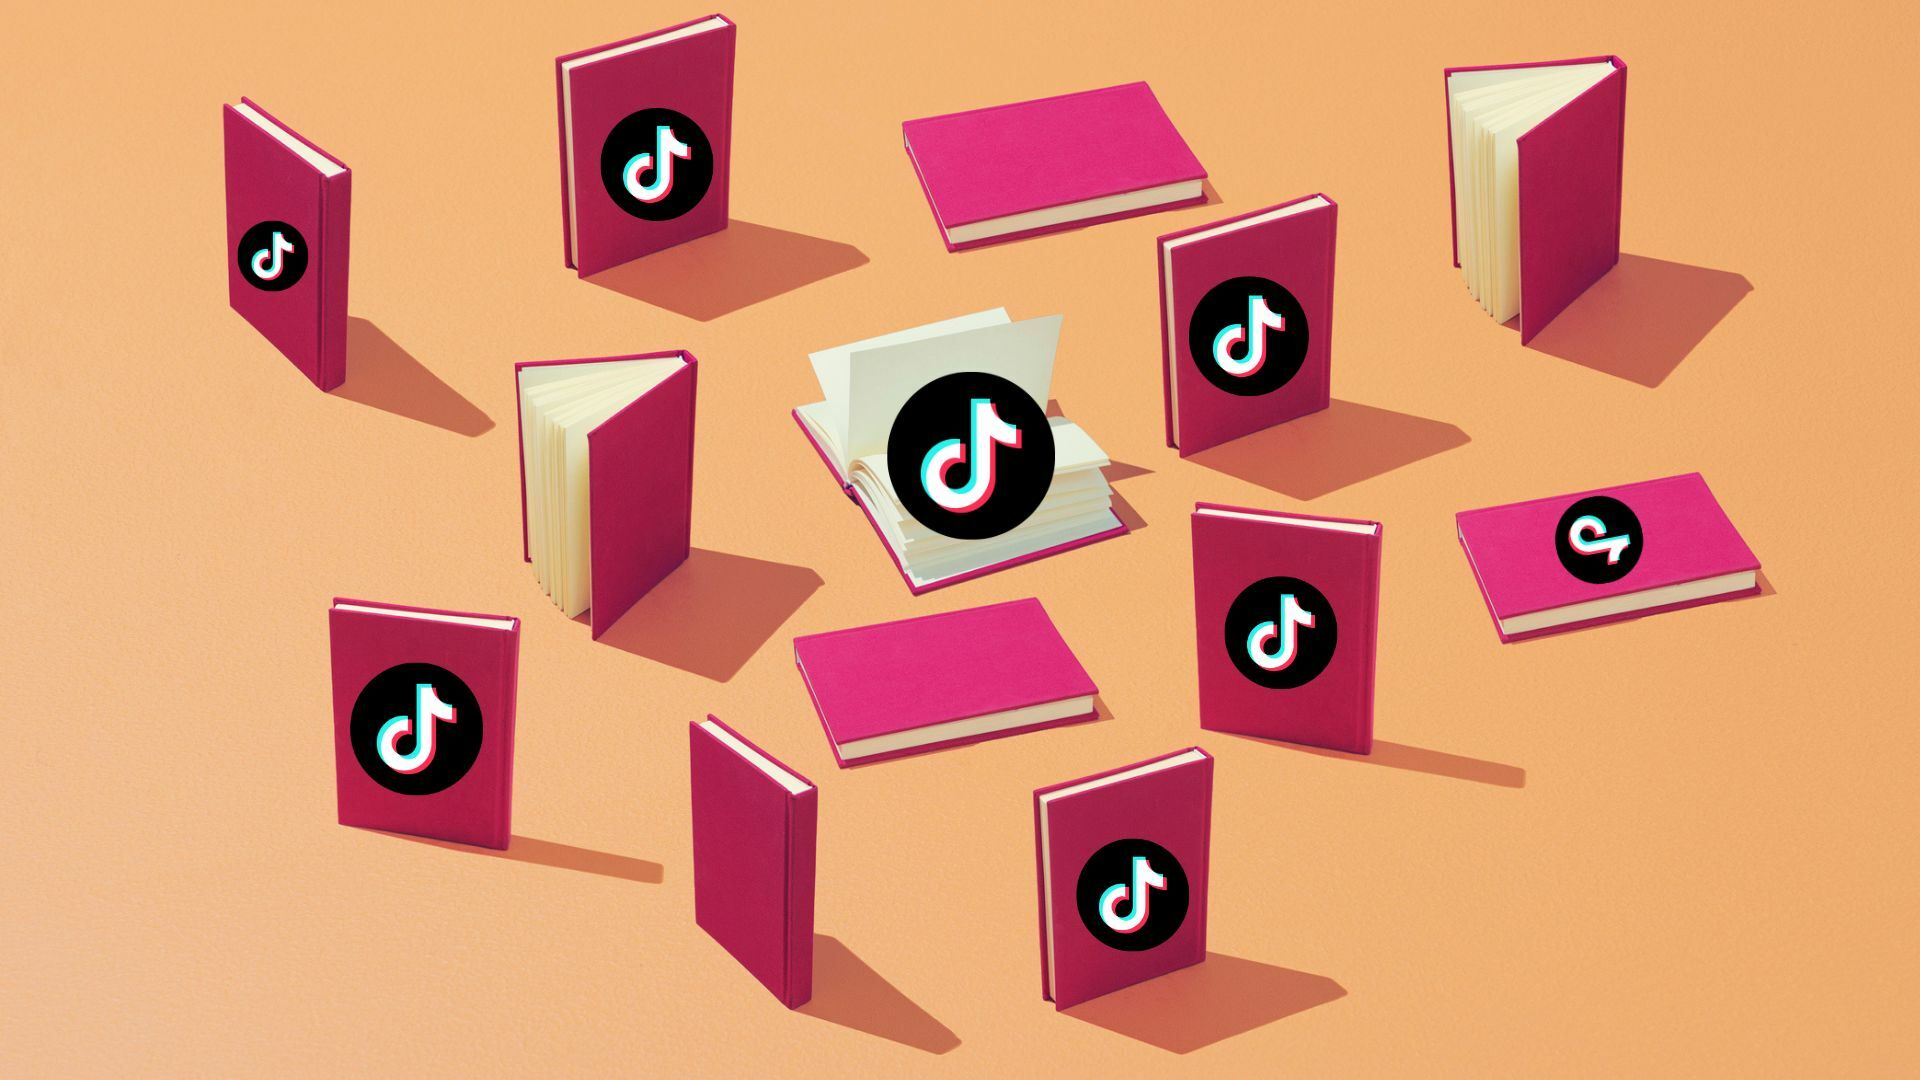 A bunch of books in shades of pink, covered with the TikTok logo.